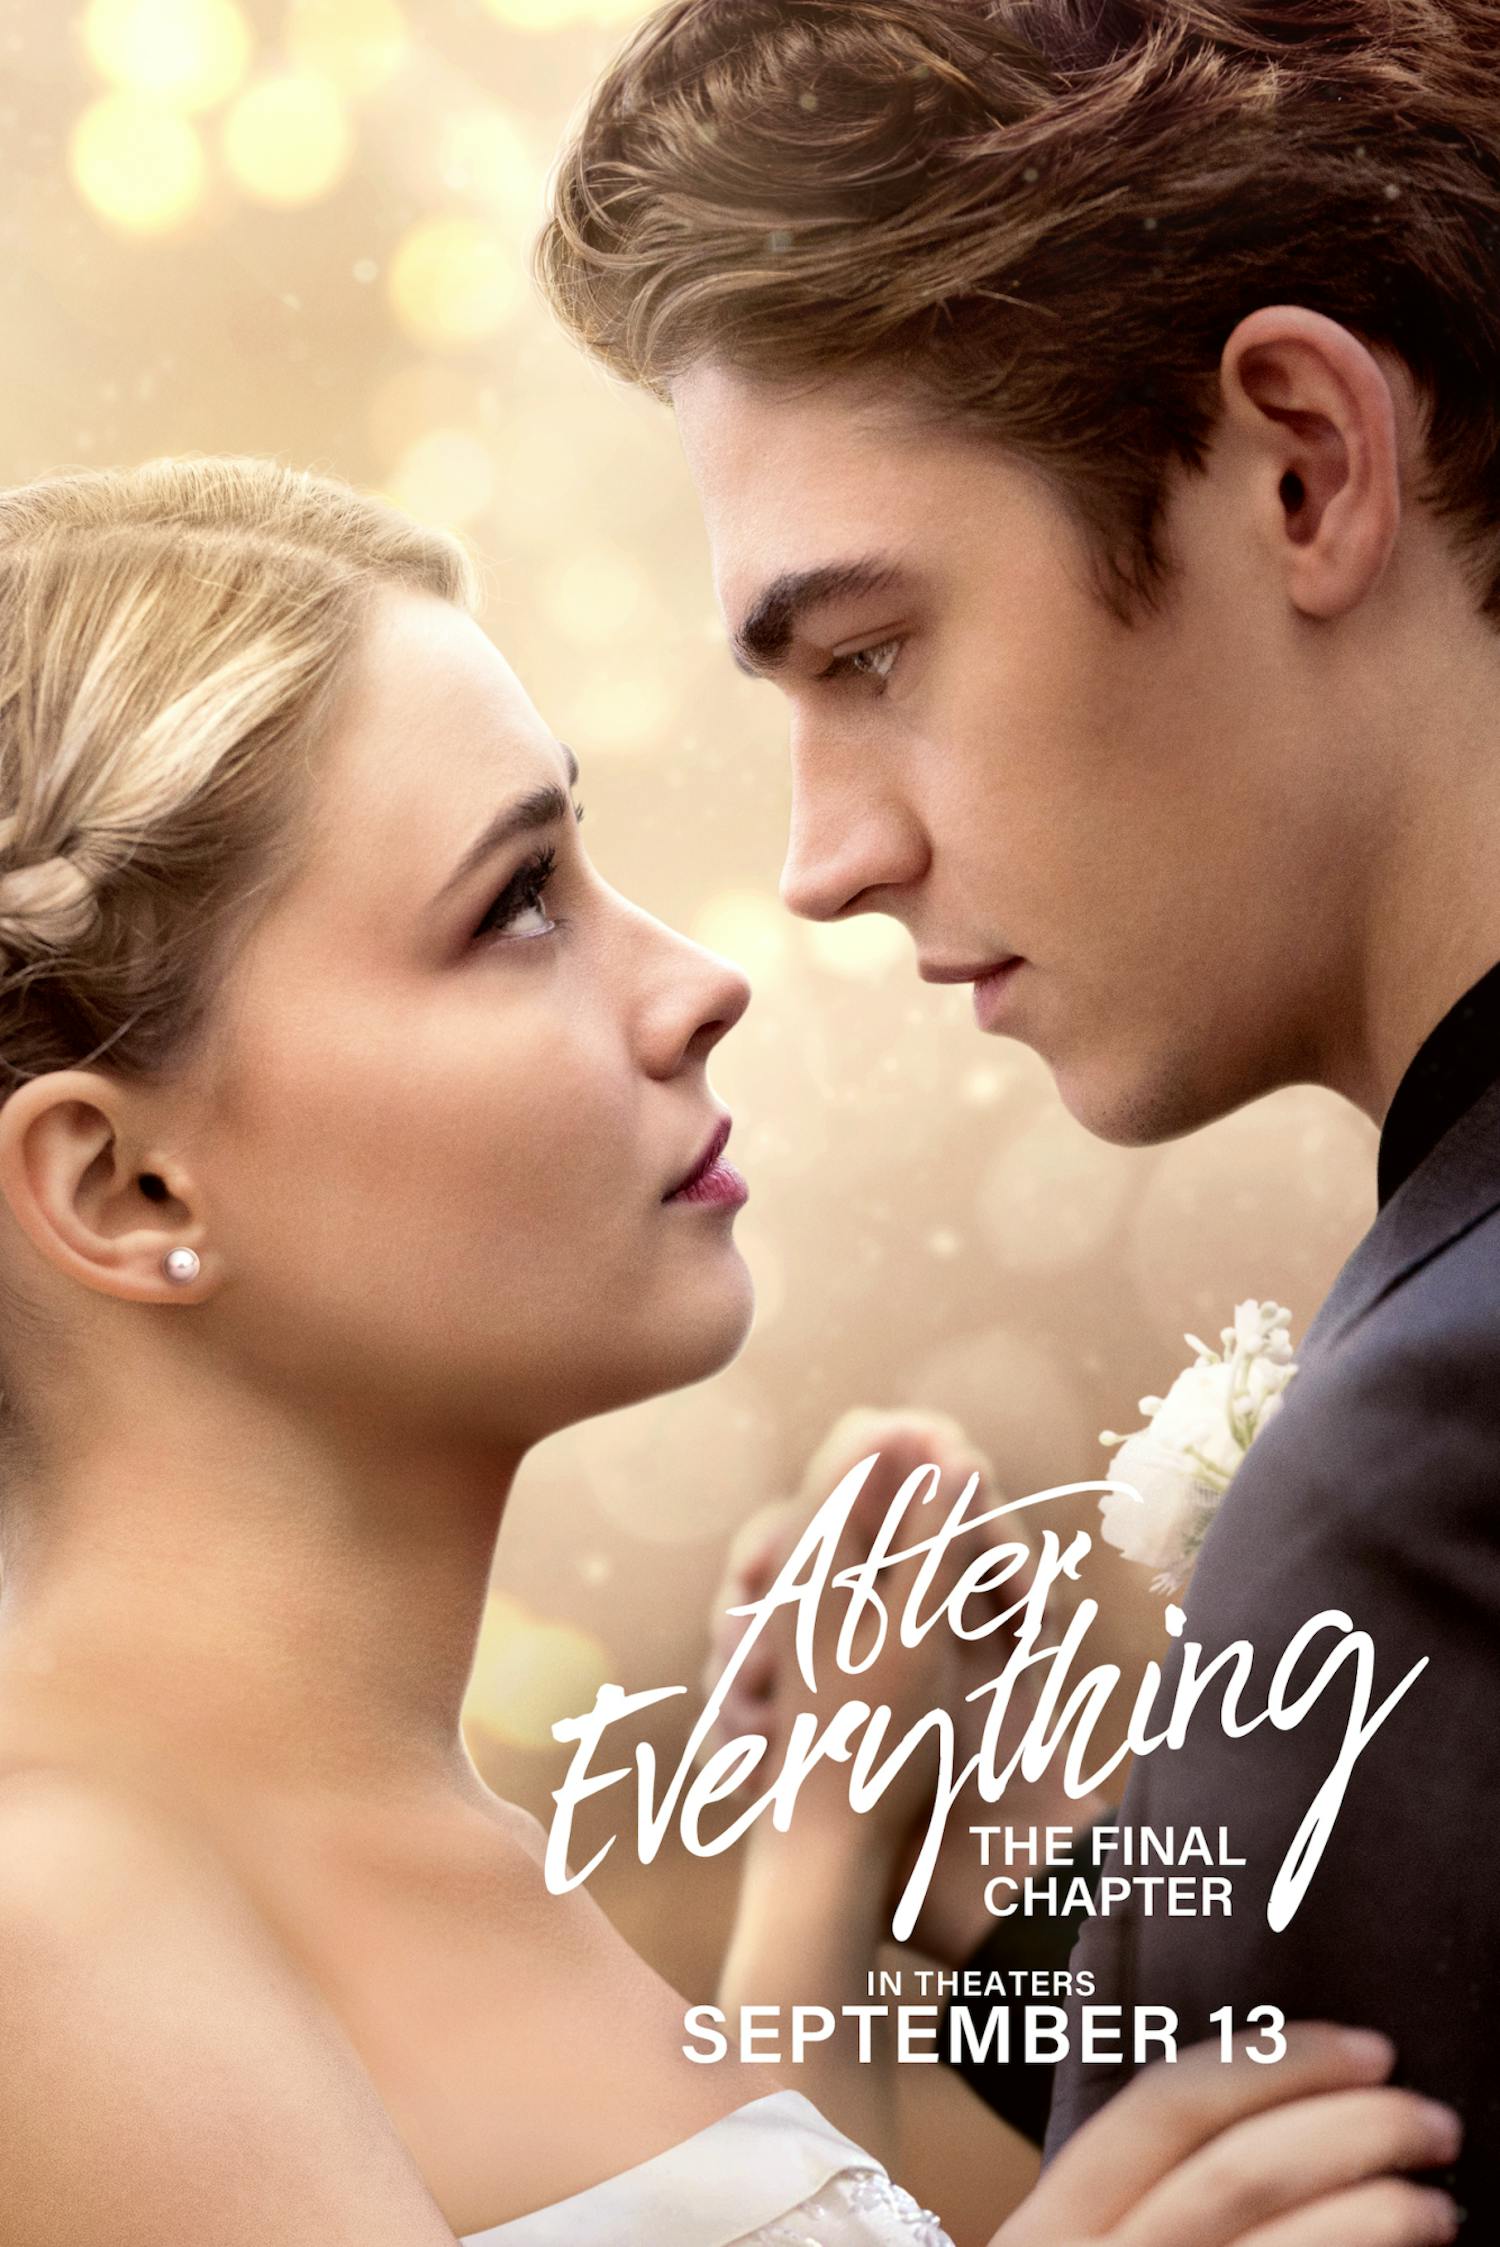 Promotional photo shows Tessa, portrayed by Josephine Langford, and Hardin, portrayed by Hero Fiennes Tiffin, from the film "After Everything," looking into each other's eyes.